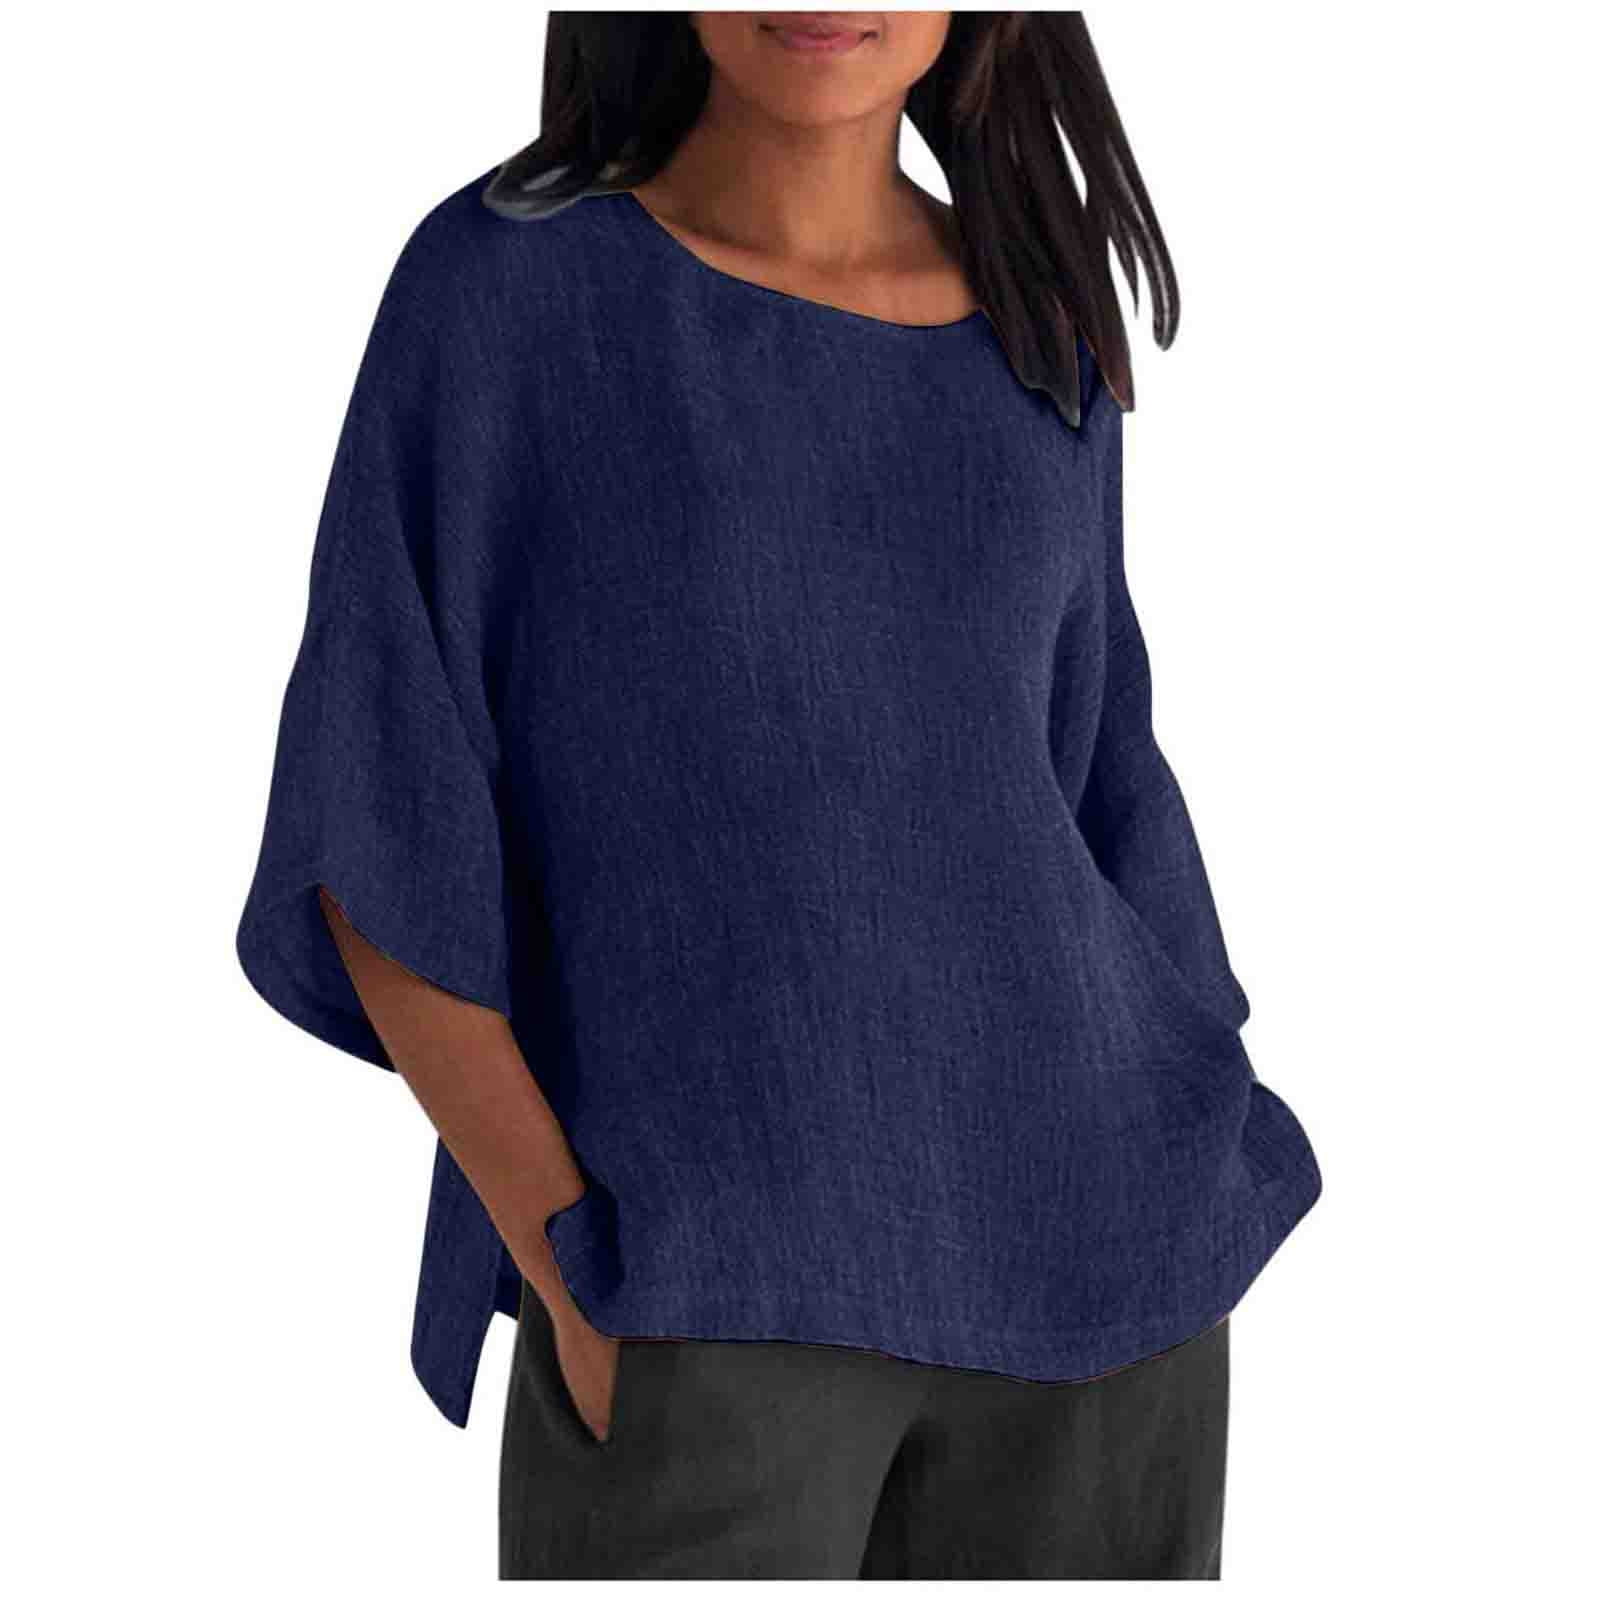 Sksloeg Blouses for Women Cotton Casual Ladies Fashion Cropped Sleeves  Elbow-Length Round Neck Solid Loose Shirt Blouse Casual Tops,Dark Blue L 